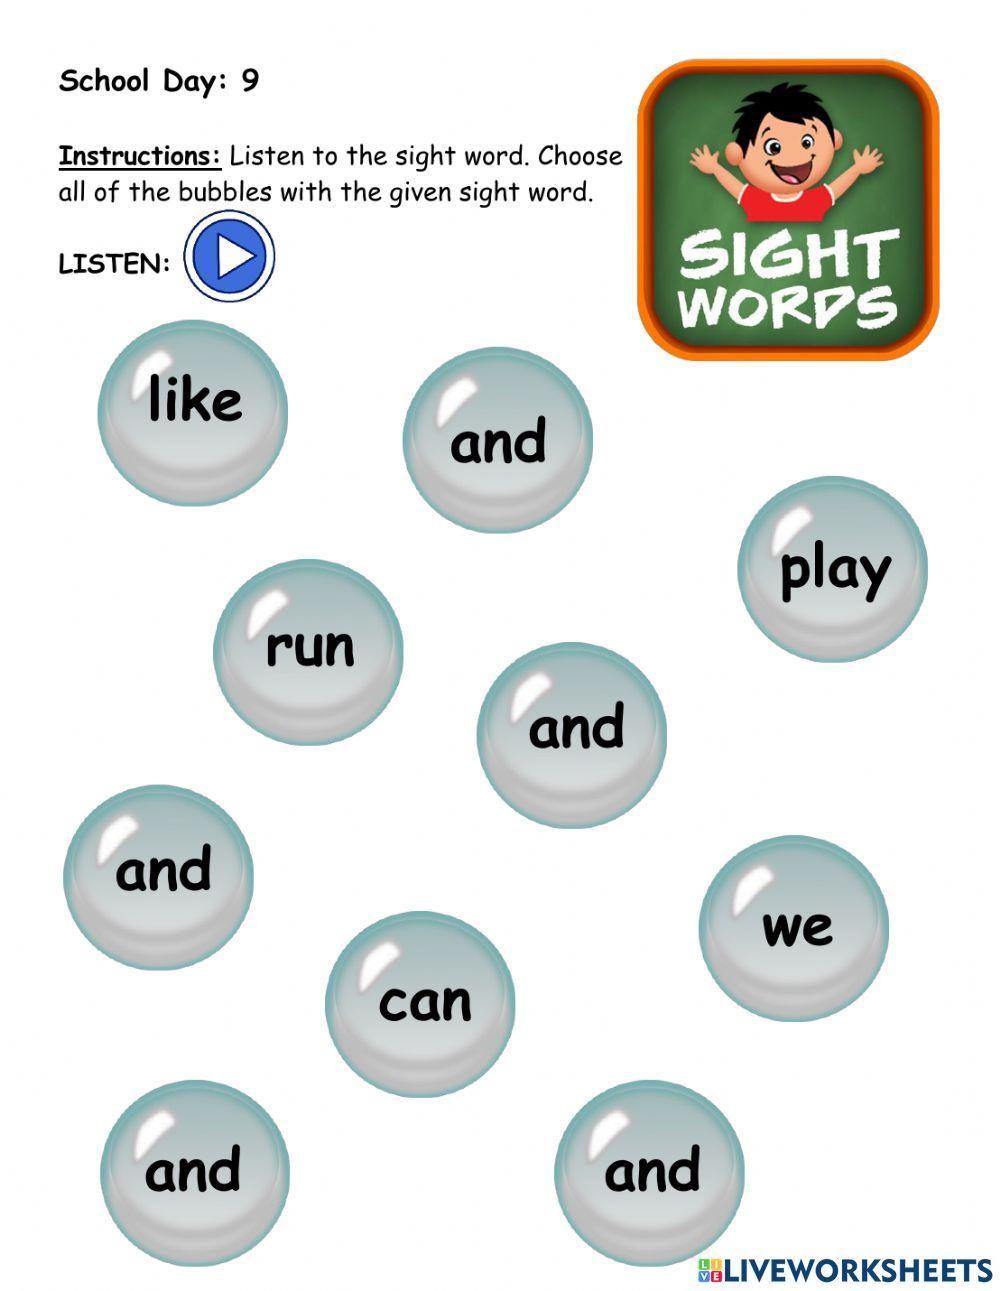 Sight word: and